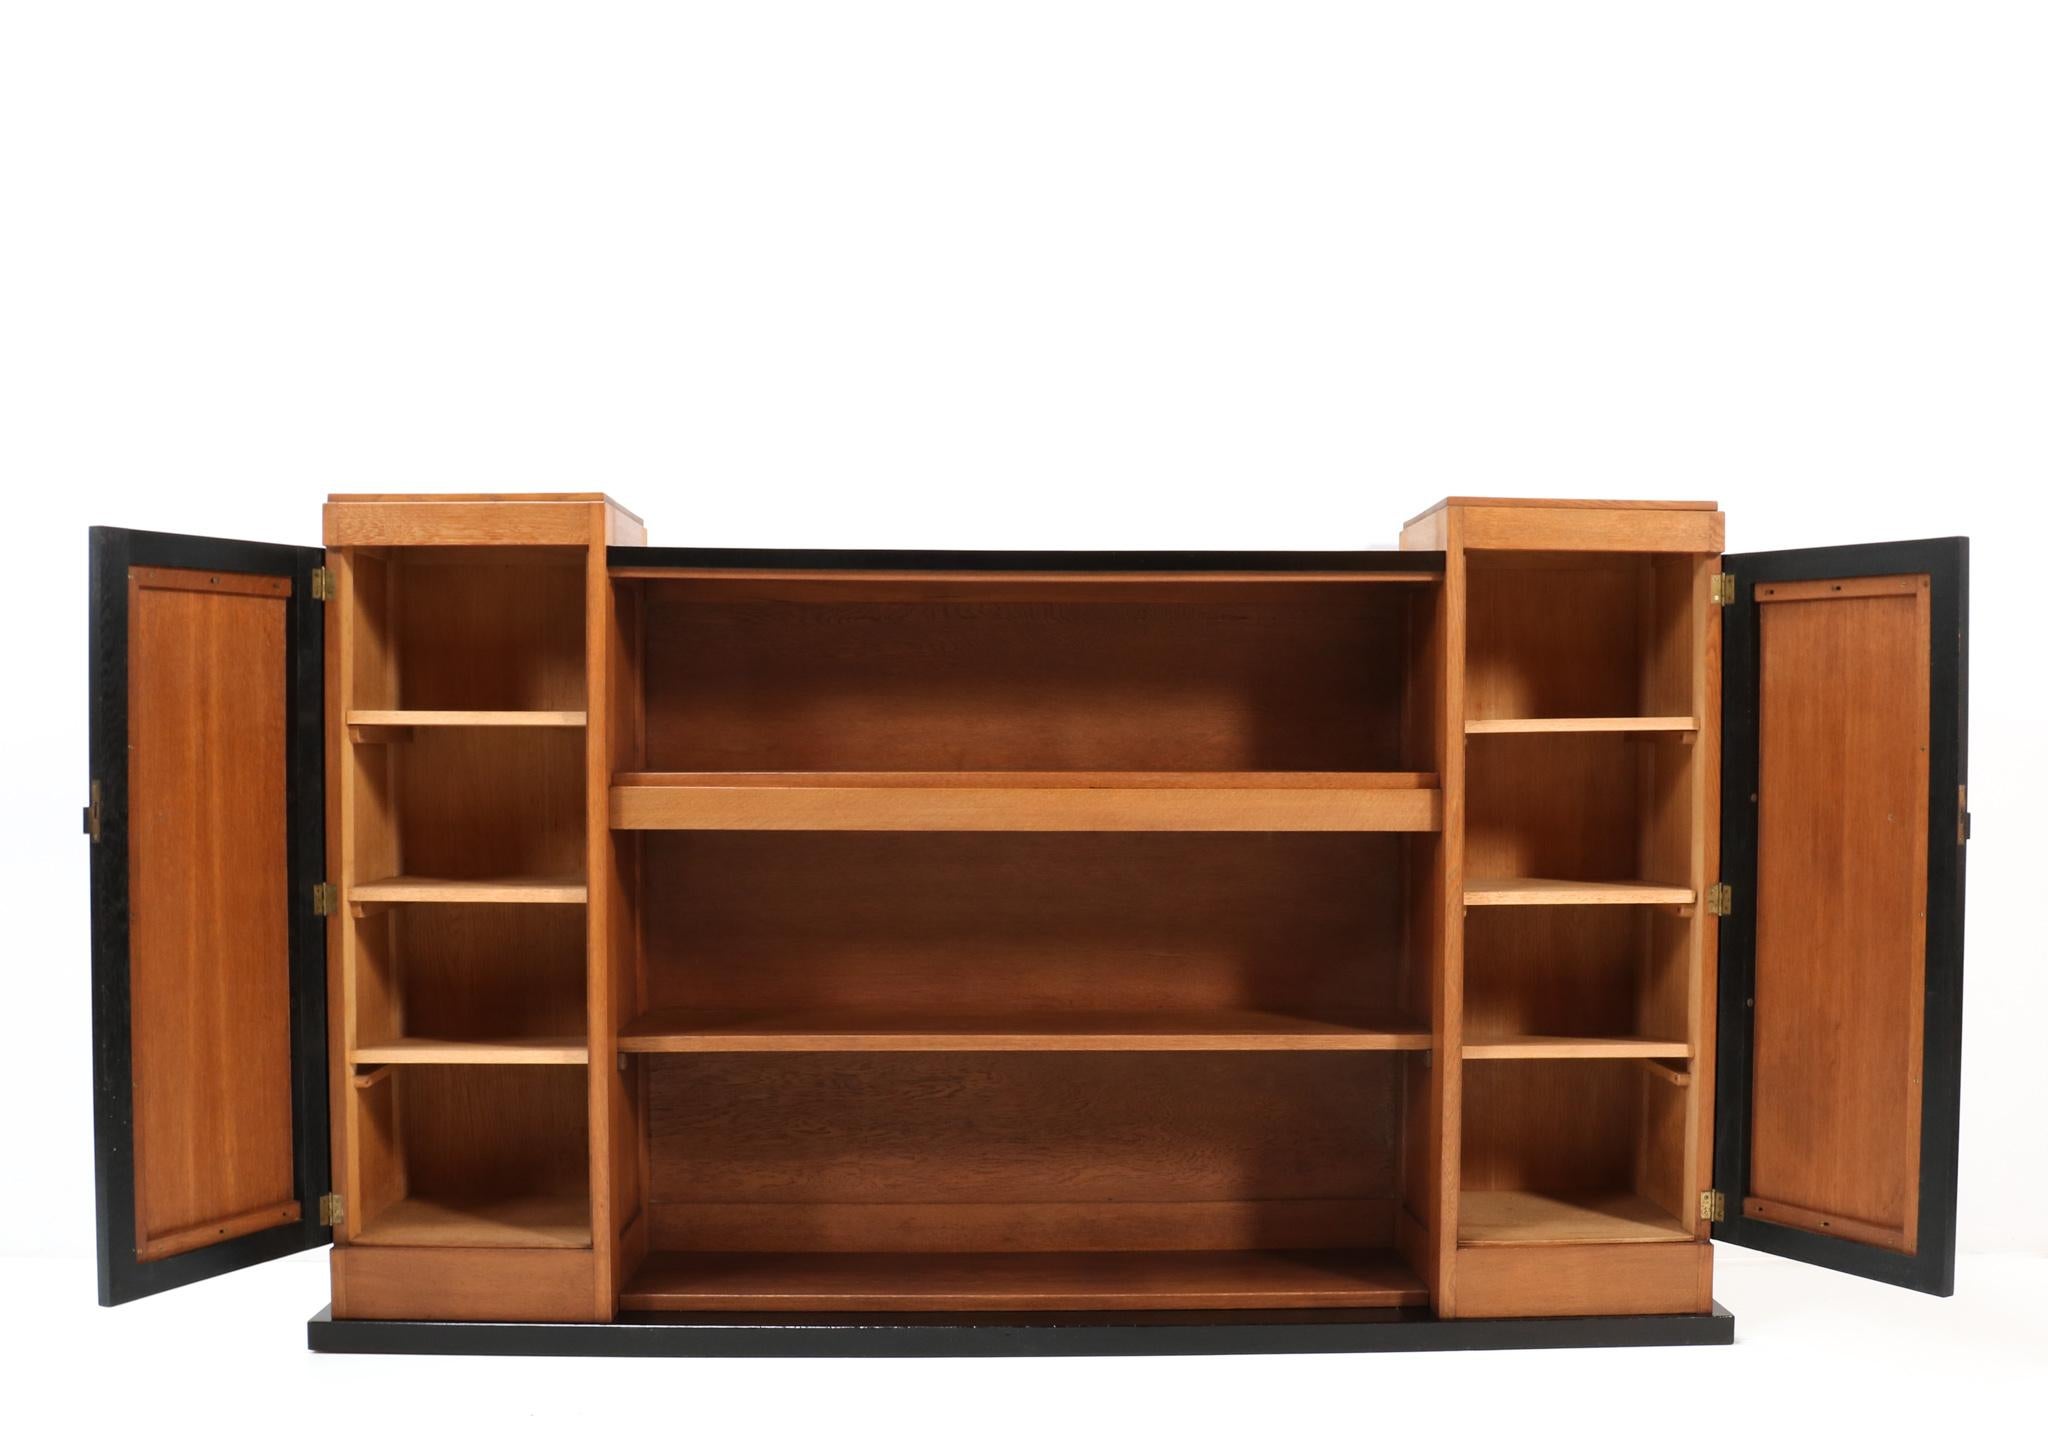 Early 20th Century  Art Deco Modernist Oak Bookcase or Credenza by Jan Brunott, 1920s For Sale